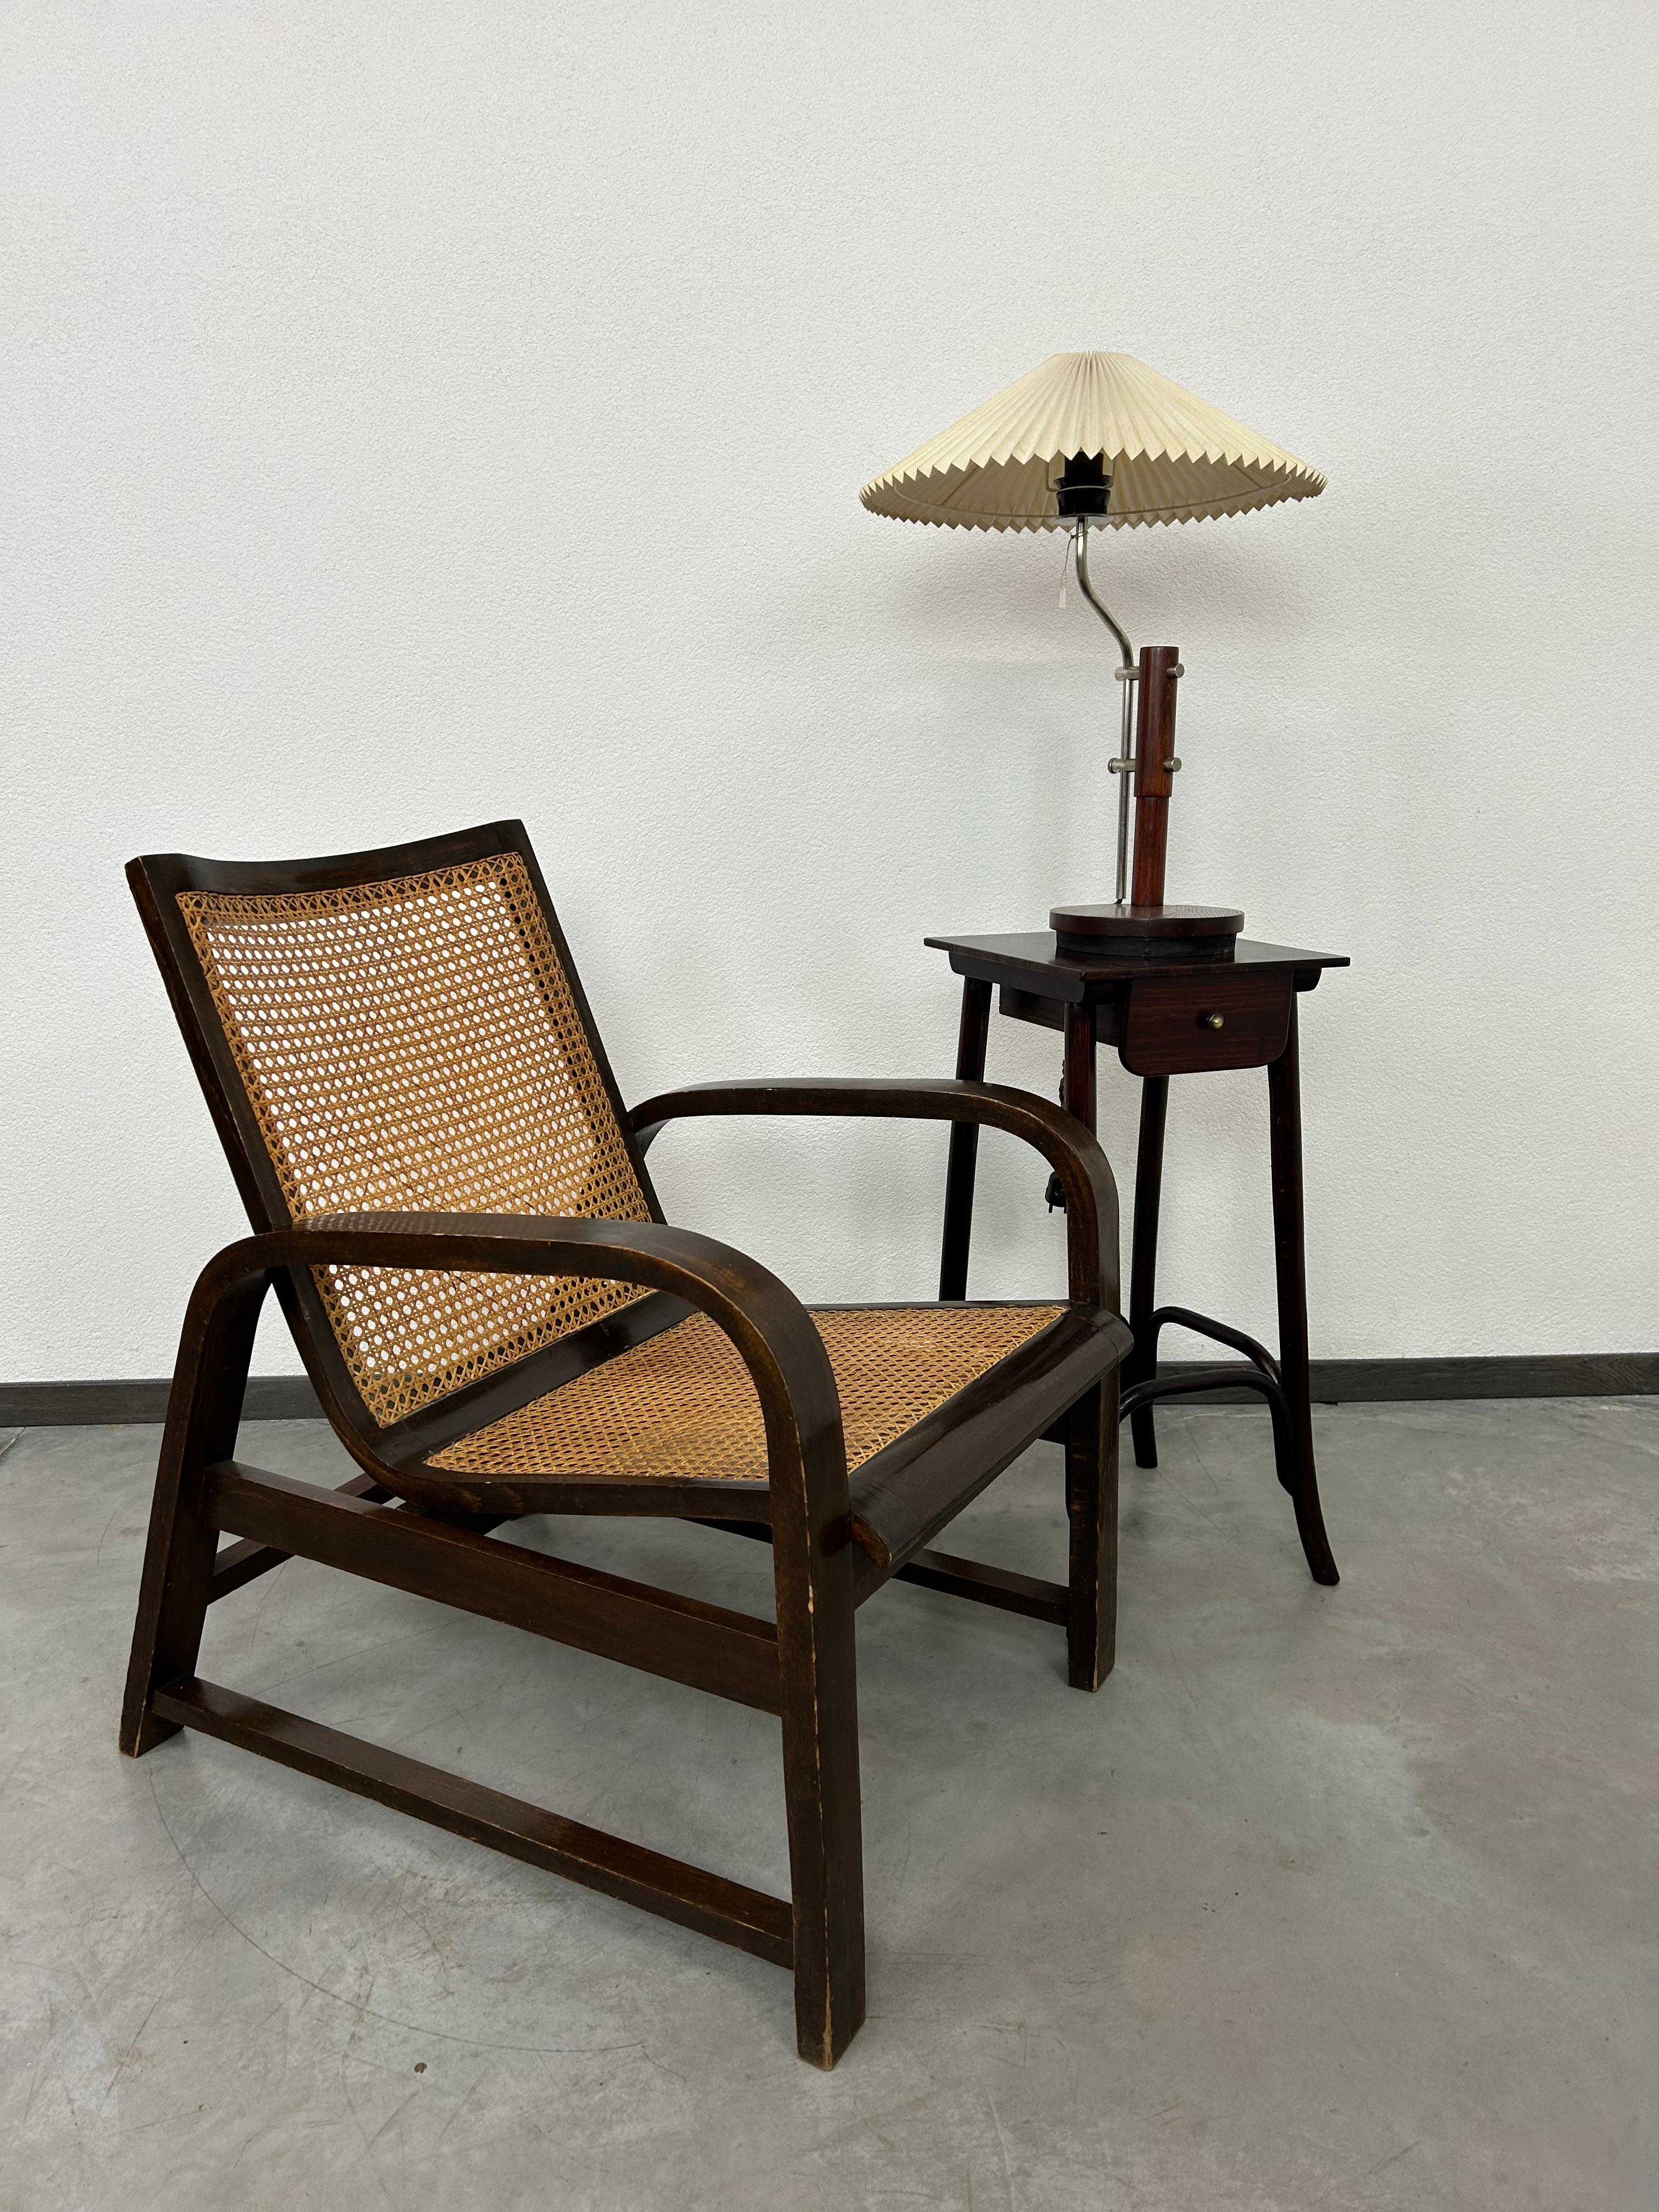 Functionalist bentwood lounge chair by Thonet Mundus in very good original condition.